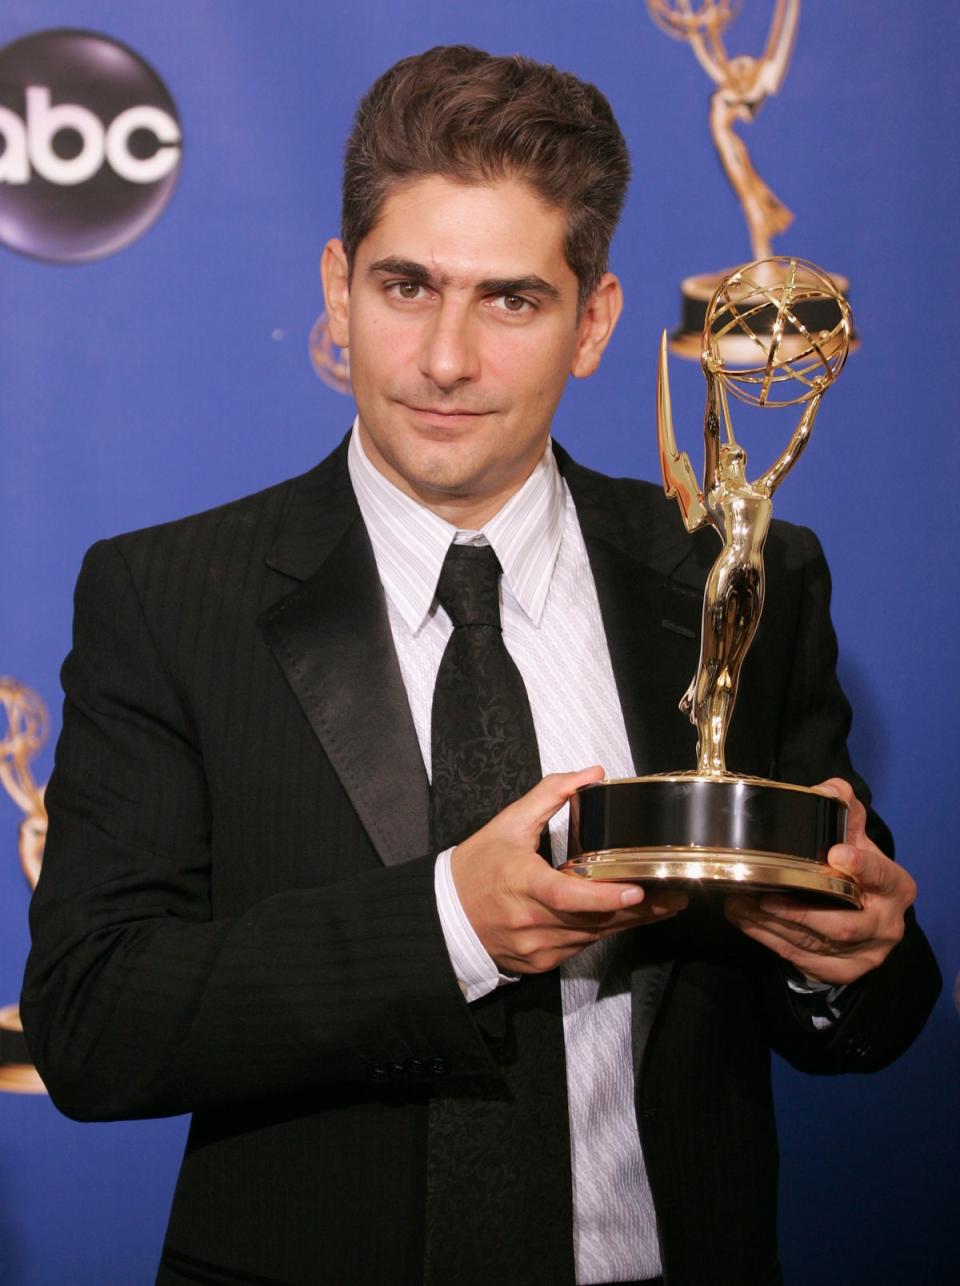 Michael Imperioli with the Emmy for Outstanding Supporting Actor in a Drama Series for his work in ‘The Sopranos’ on 19 September 2004 at the Shrine Auditorium, in Los Angeles, California (Carlo Allegri/Getty Images)